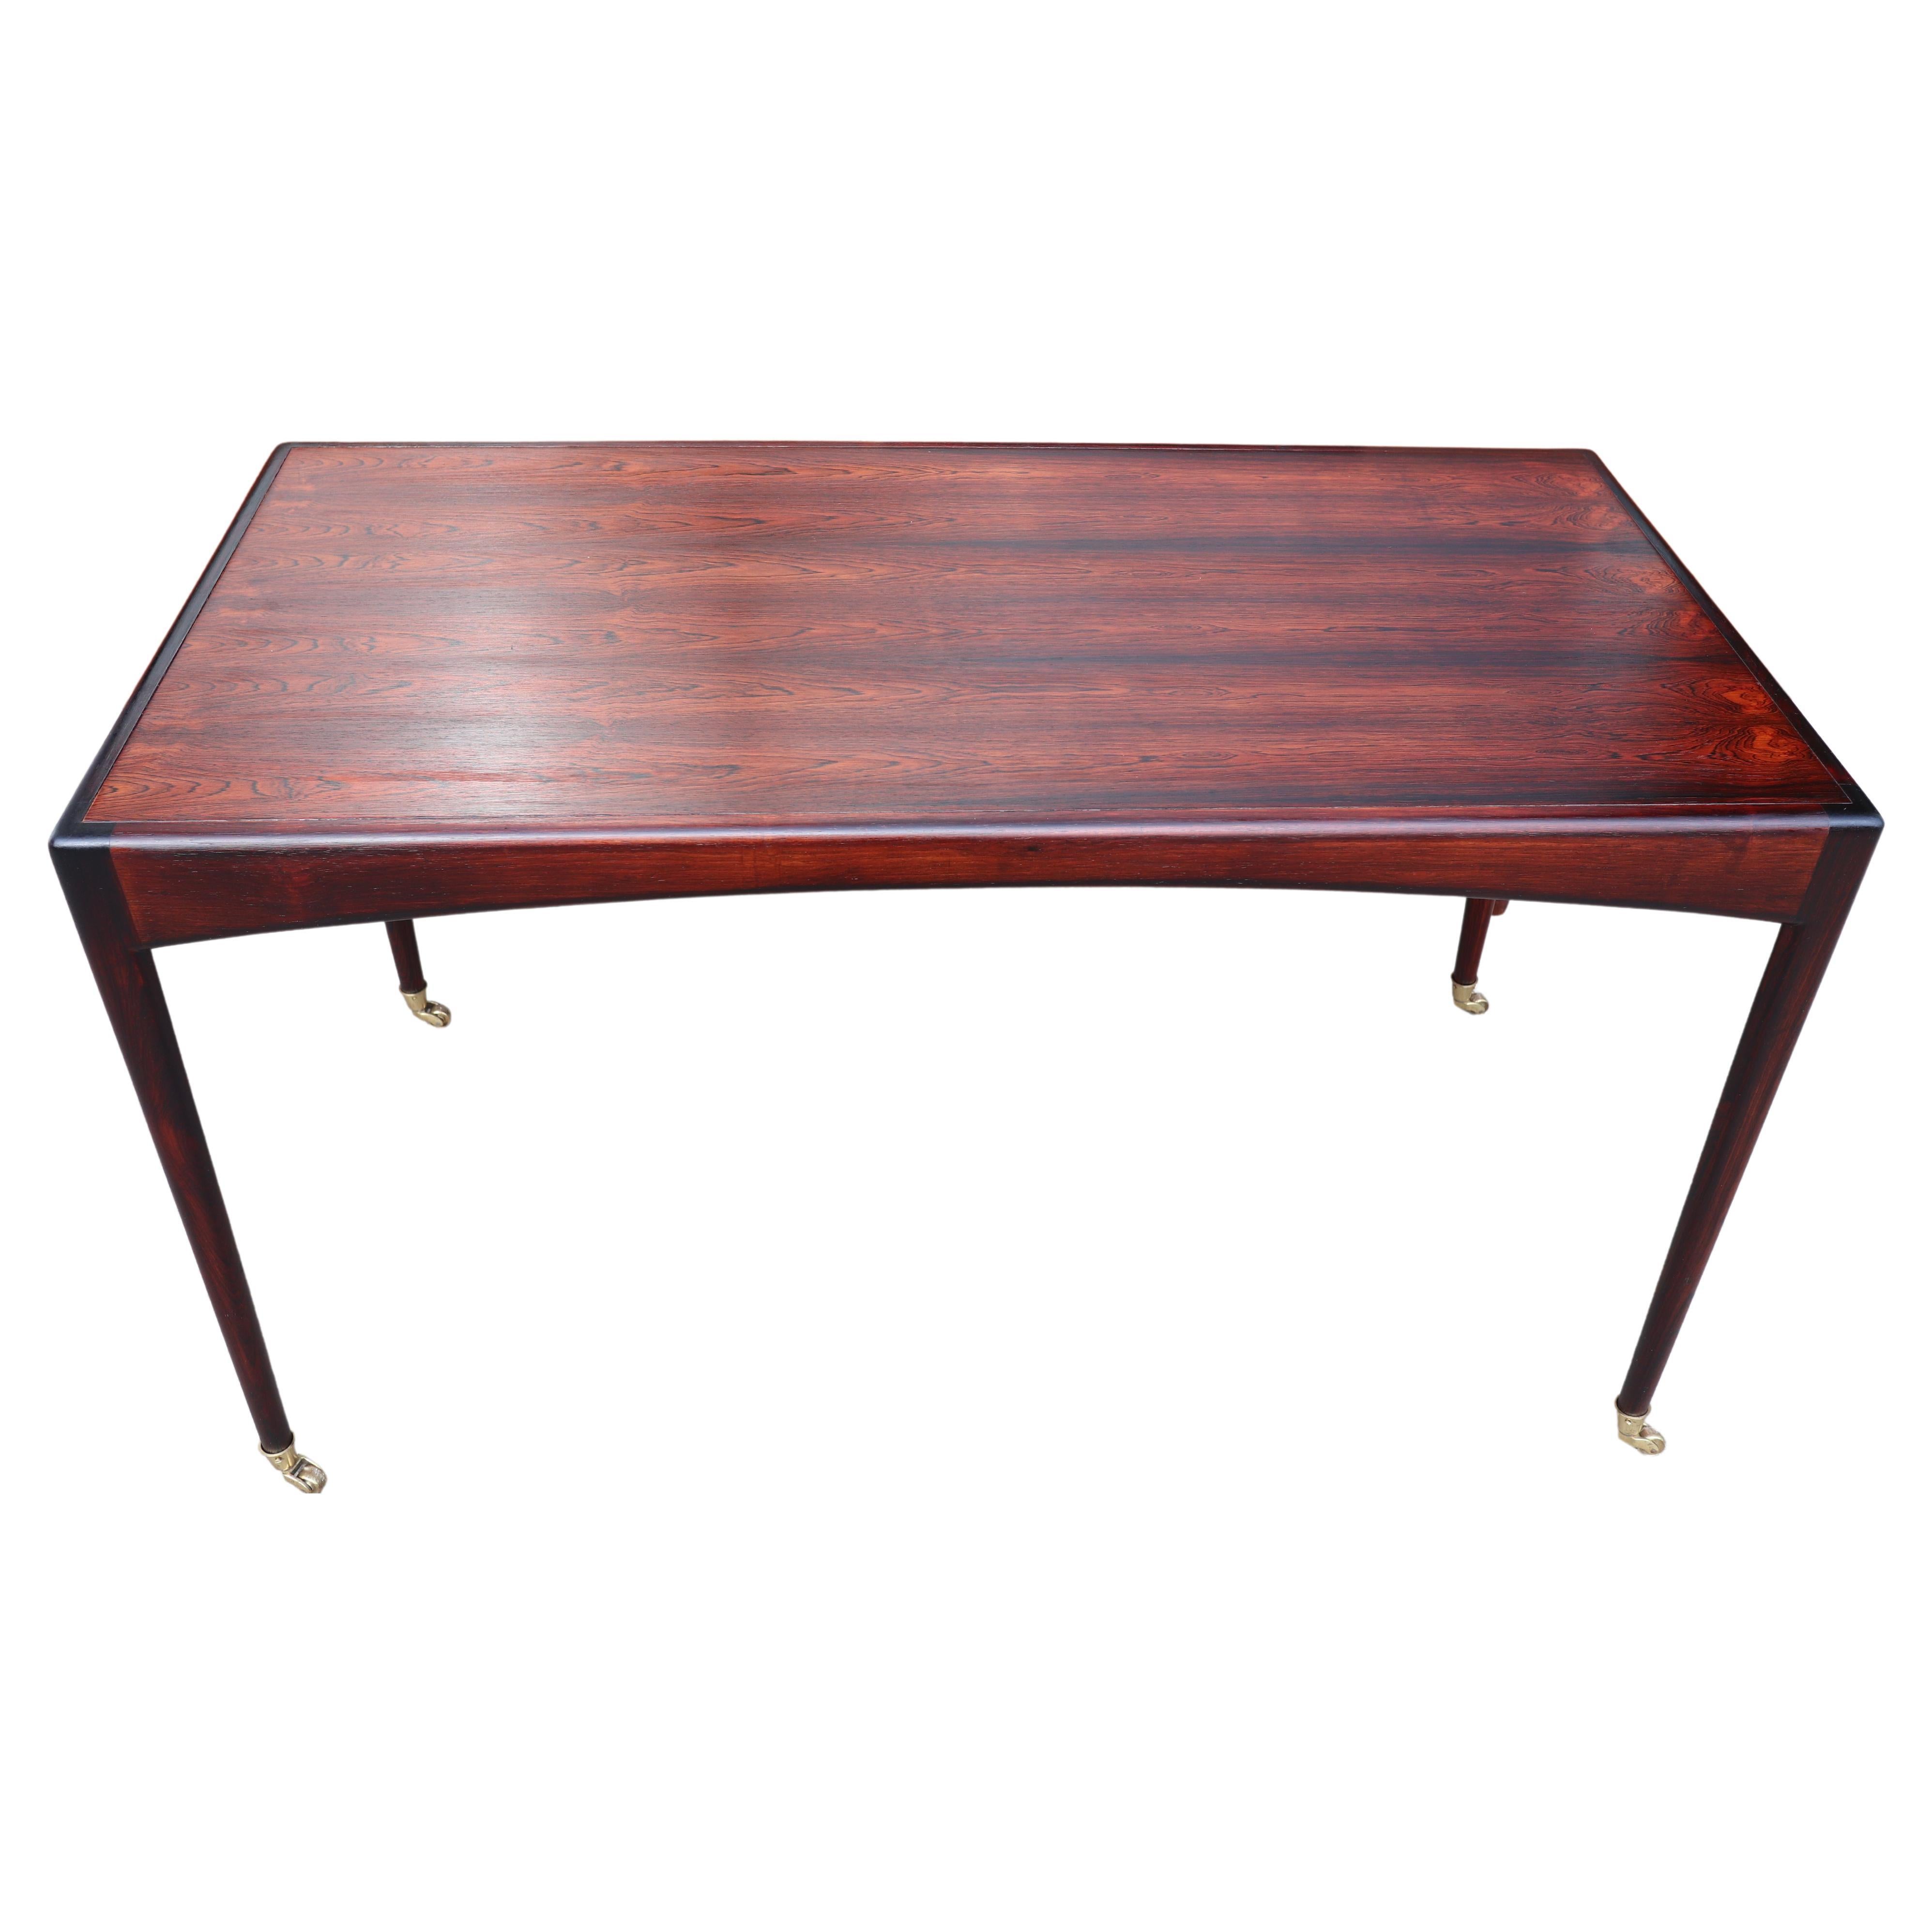 Vintage 1960s Desk/Console Table "Modus" in Rio Rosewood, Kristian Vedel For Sale